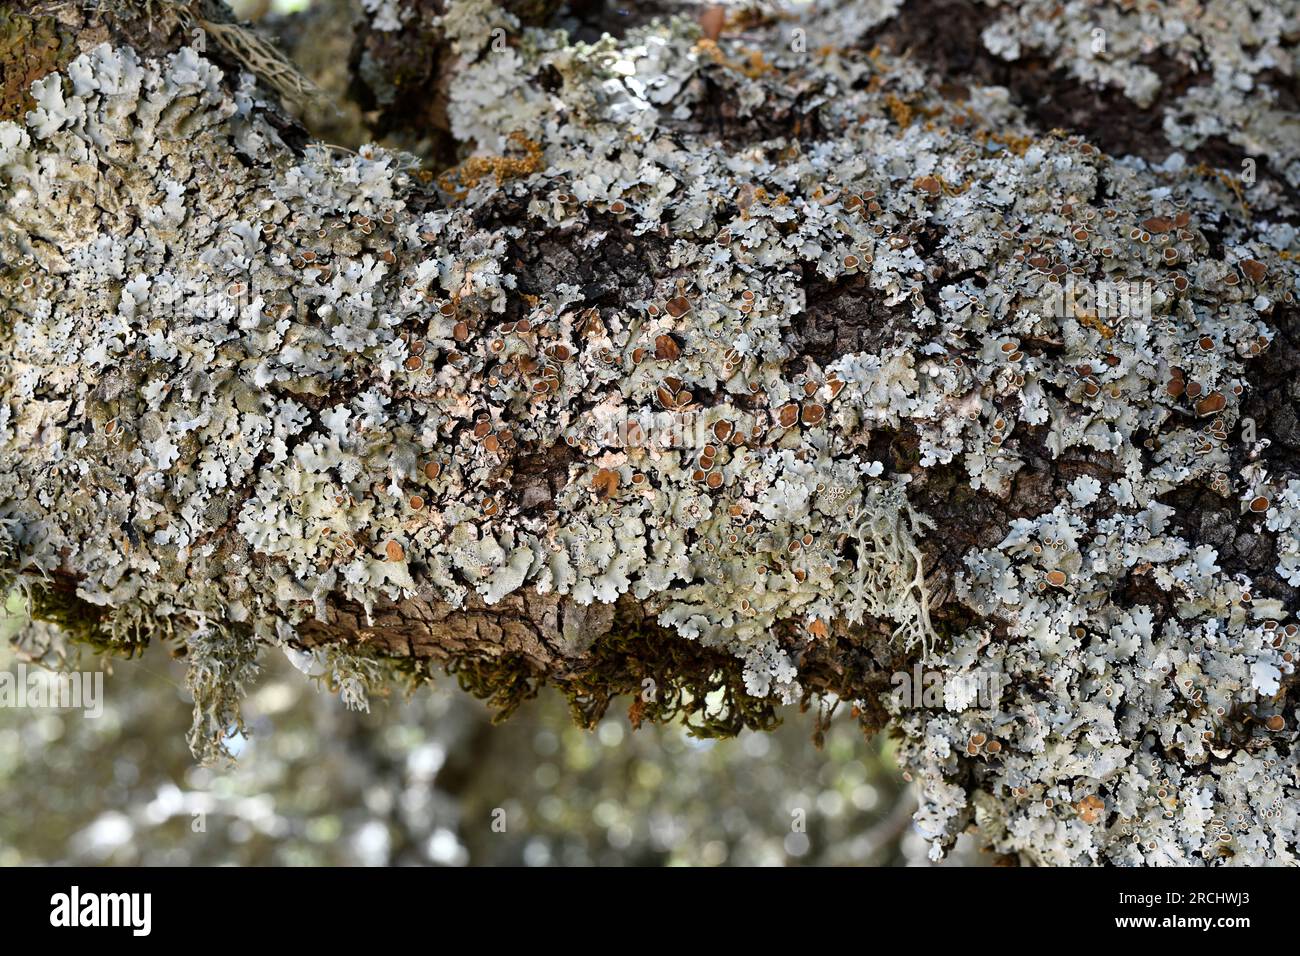 Parmelia quercina is a foliose lichen that grows on tree bark. This photo was taken in Las Villuercas, Cáceres, Extremadura, Spain. Stock Photo